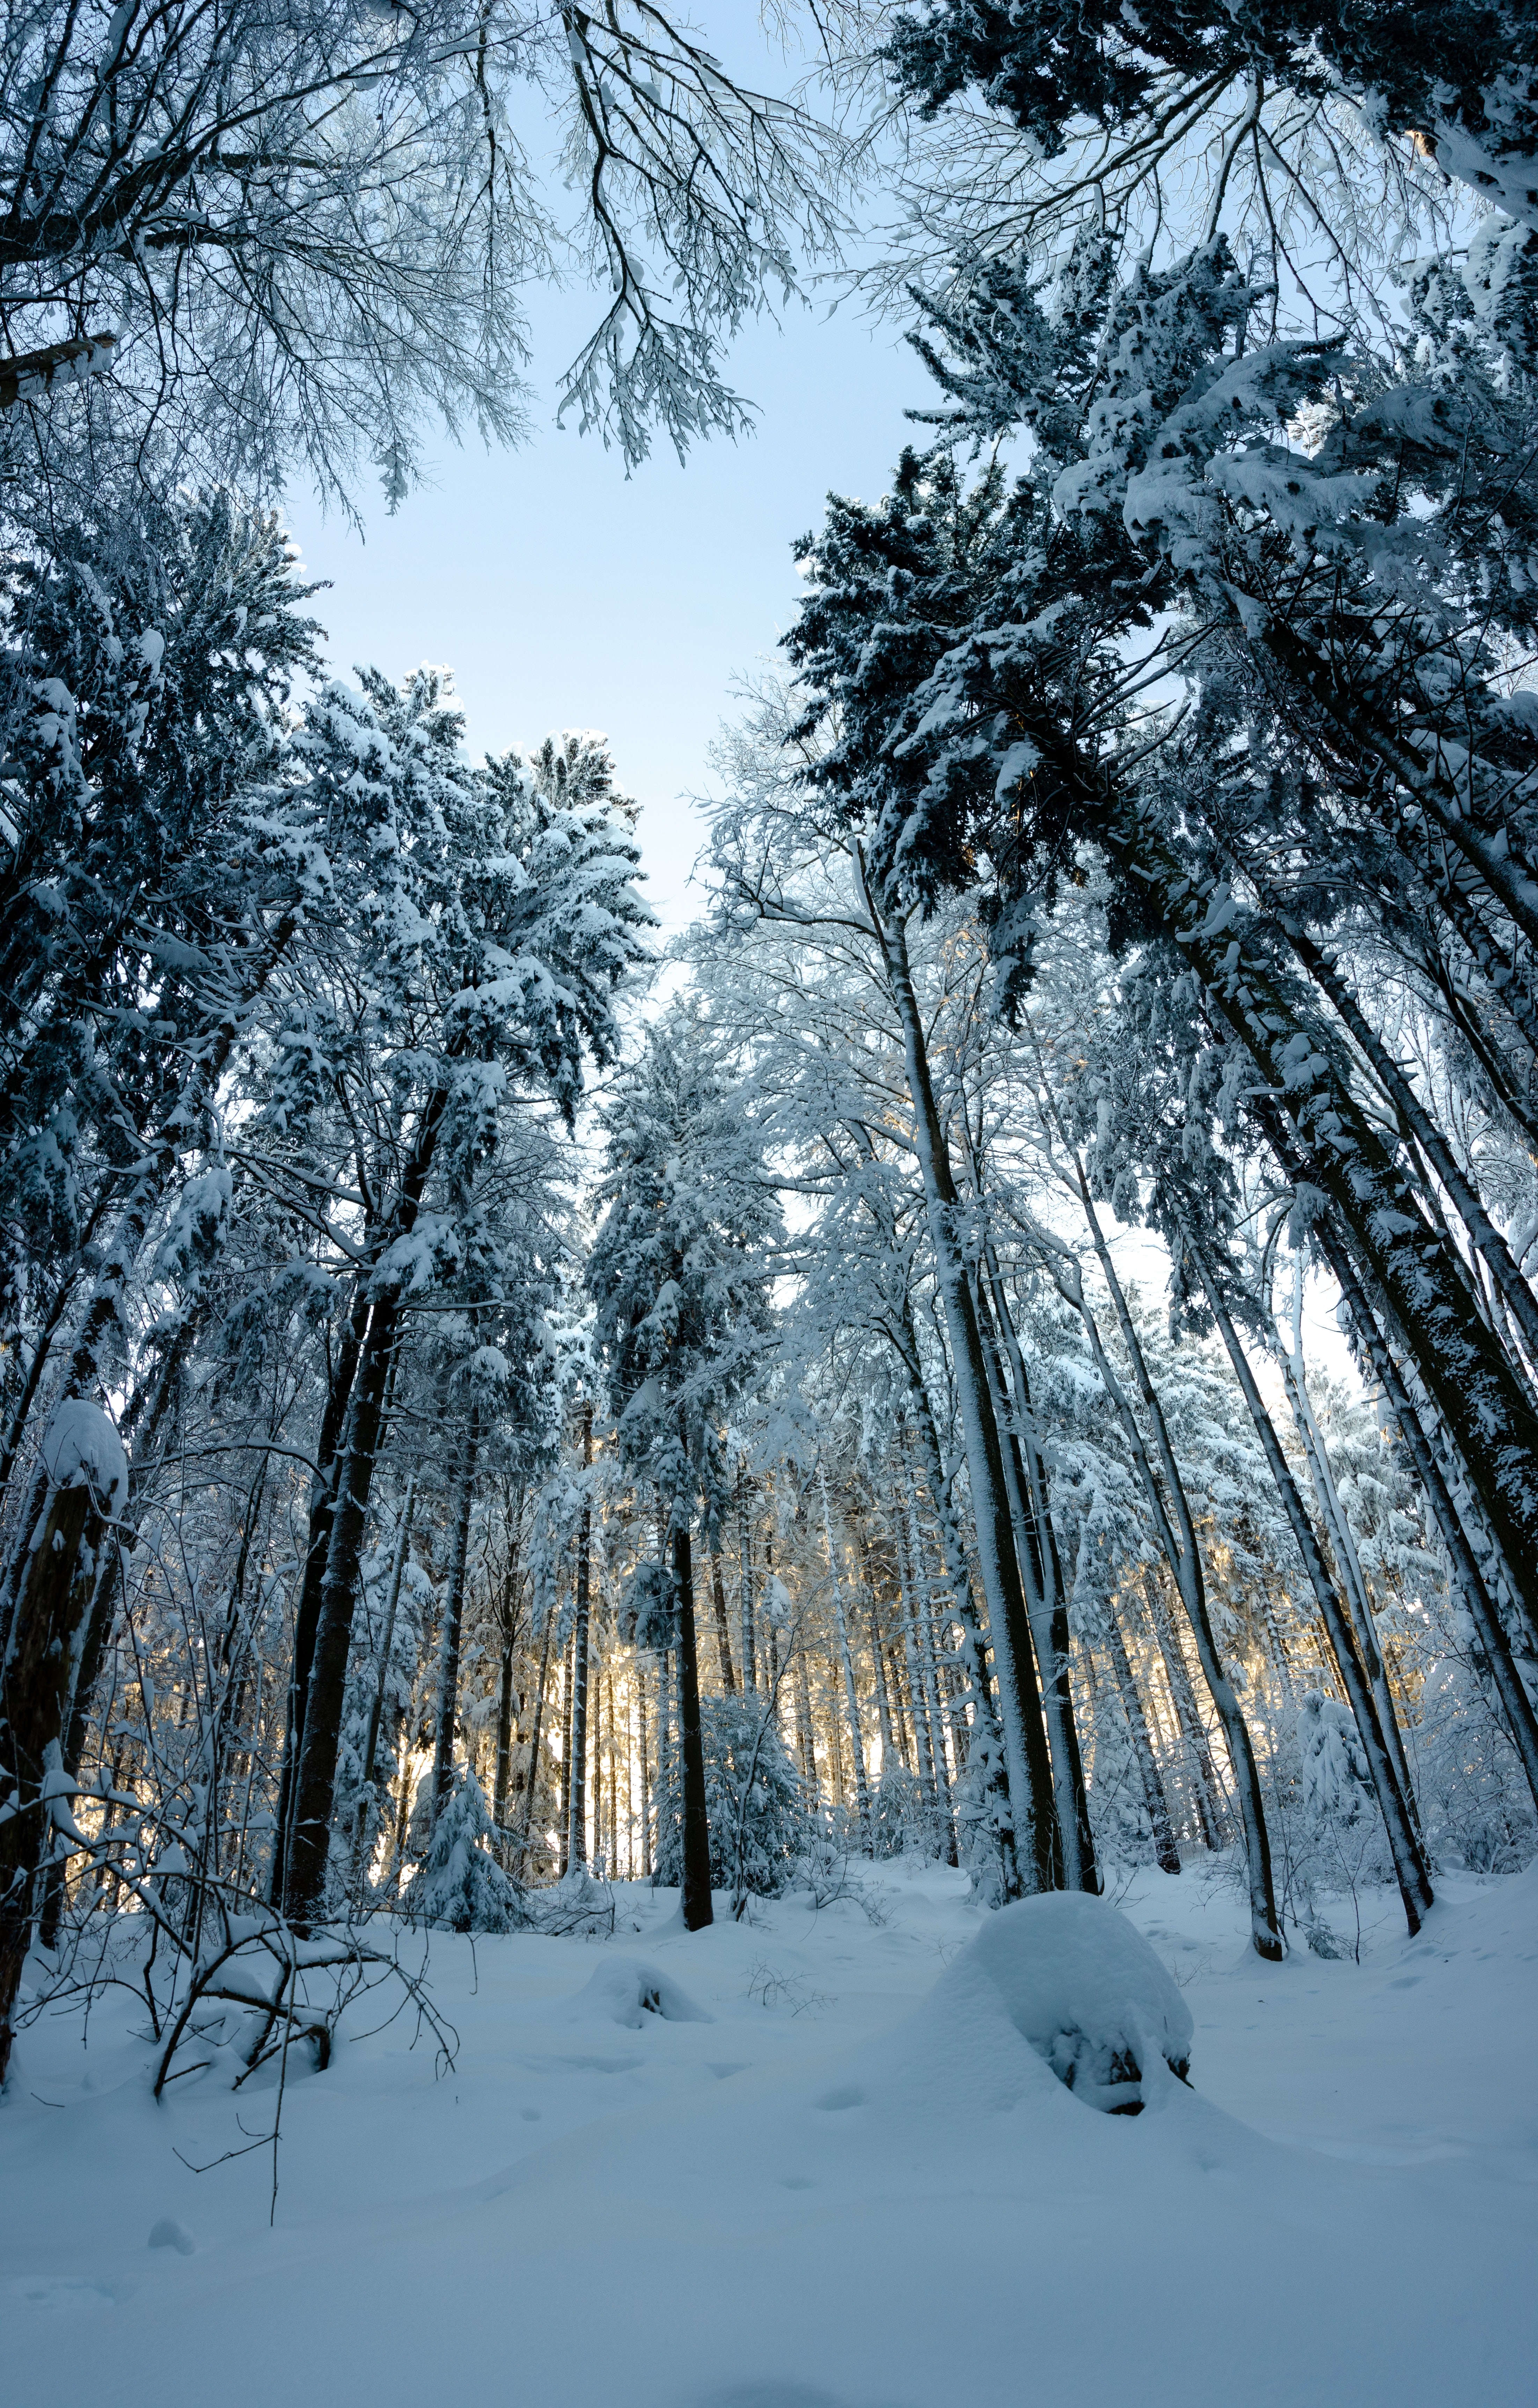 snow covered, nature, winter, trees, pine, snow, forest, snowbound High Definition image